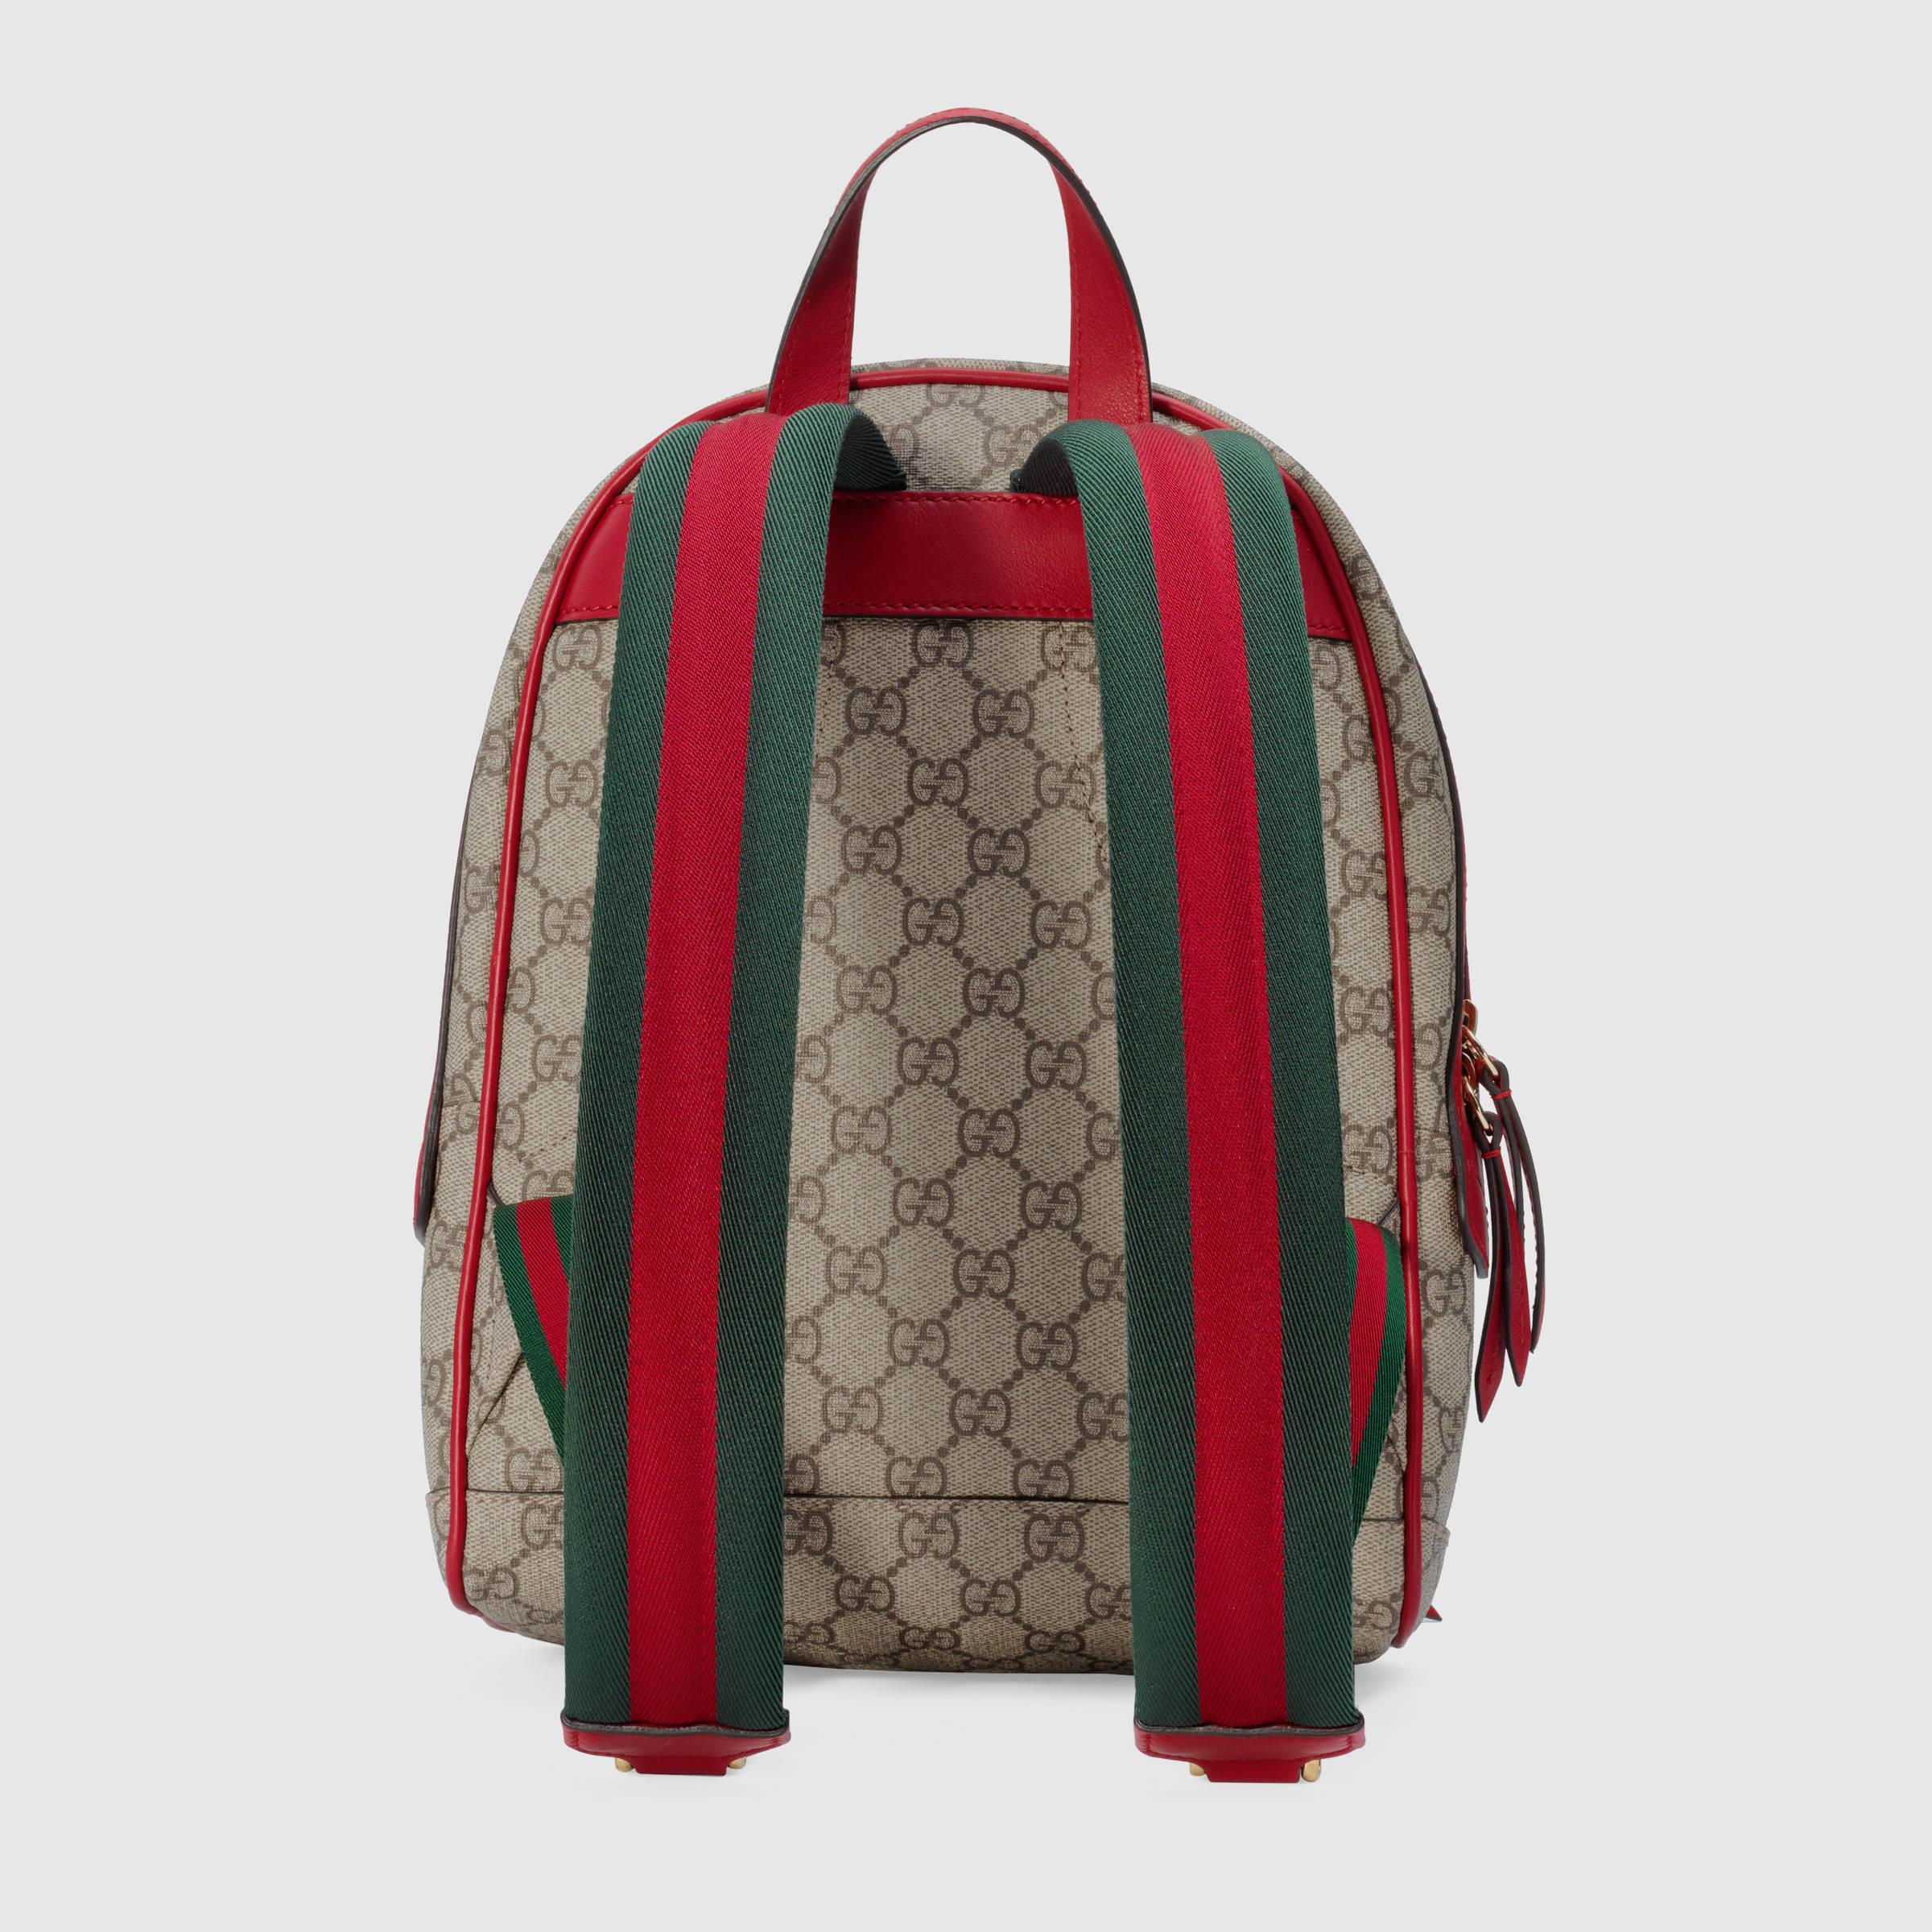 Gucci Limited Edition Gg Supreme Backpack - Lyst